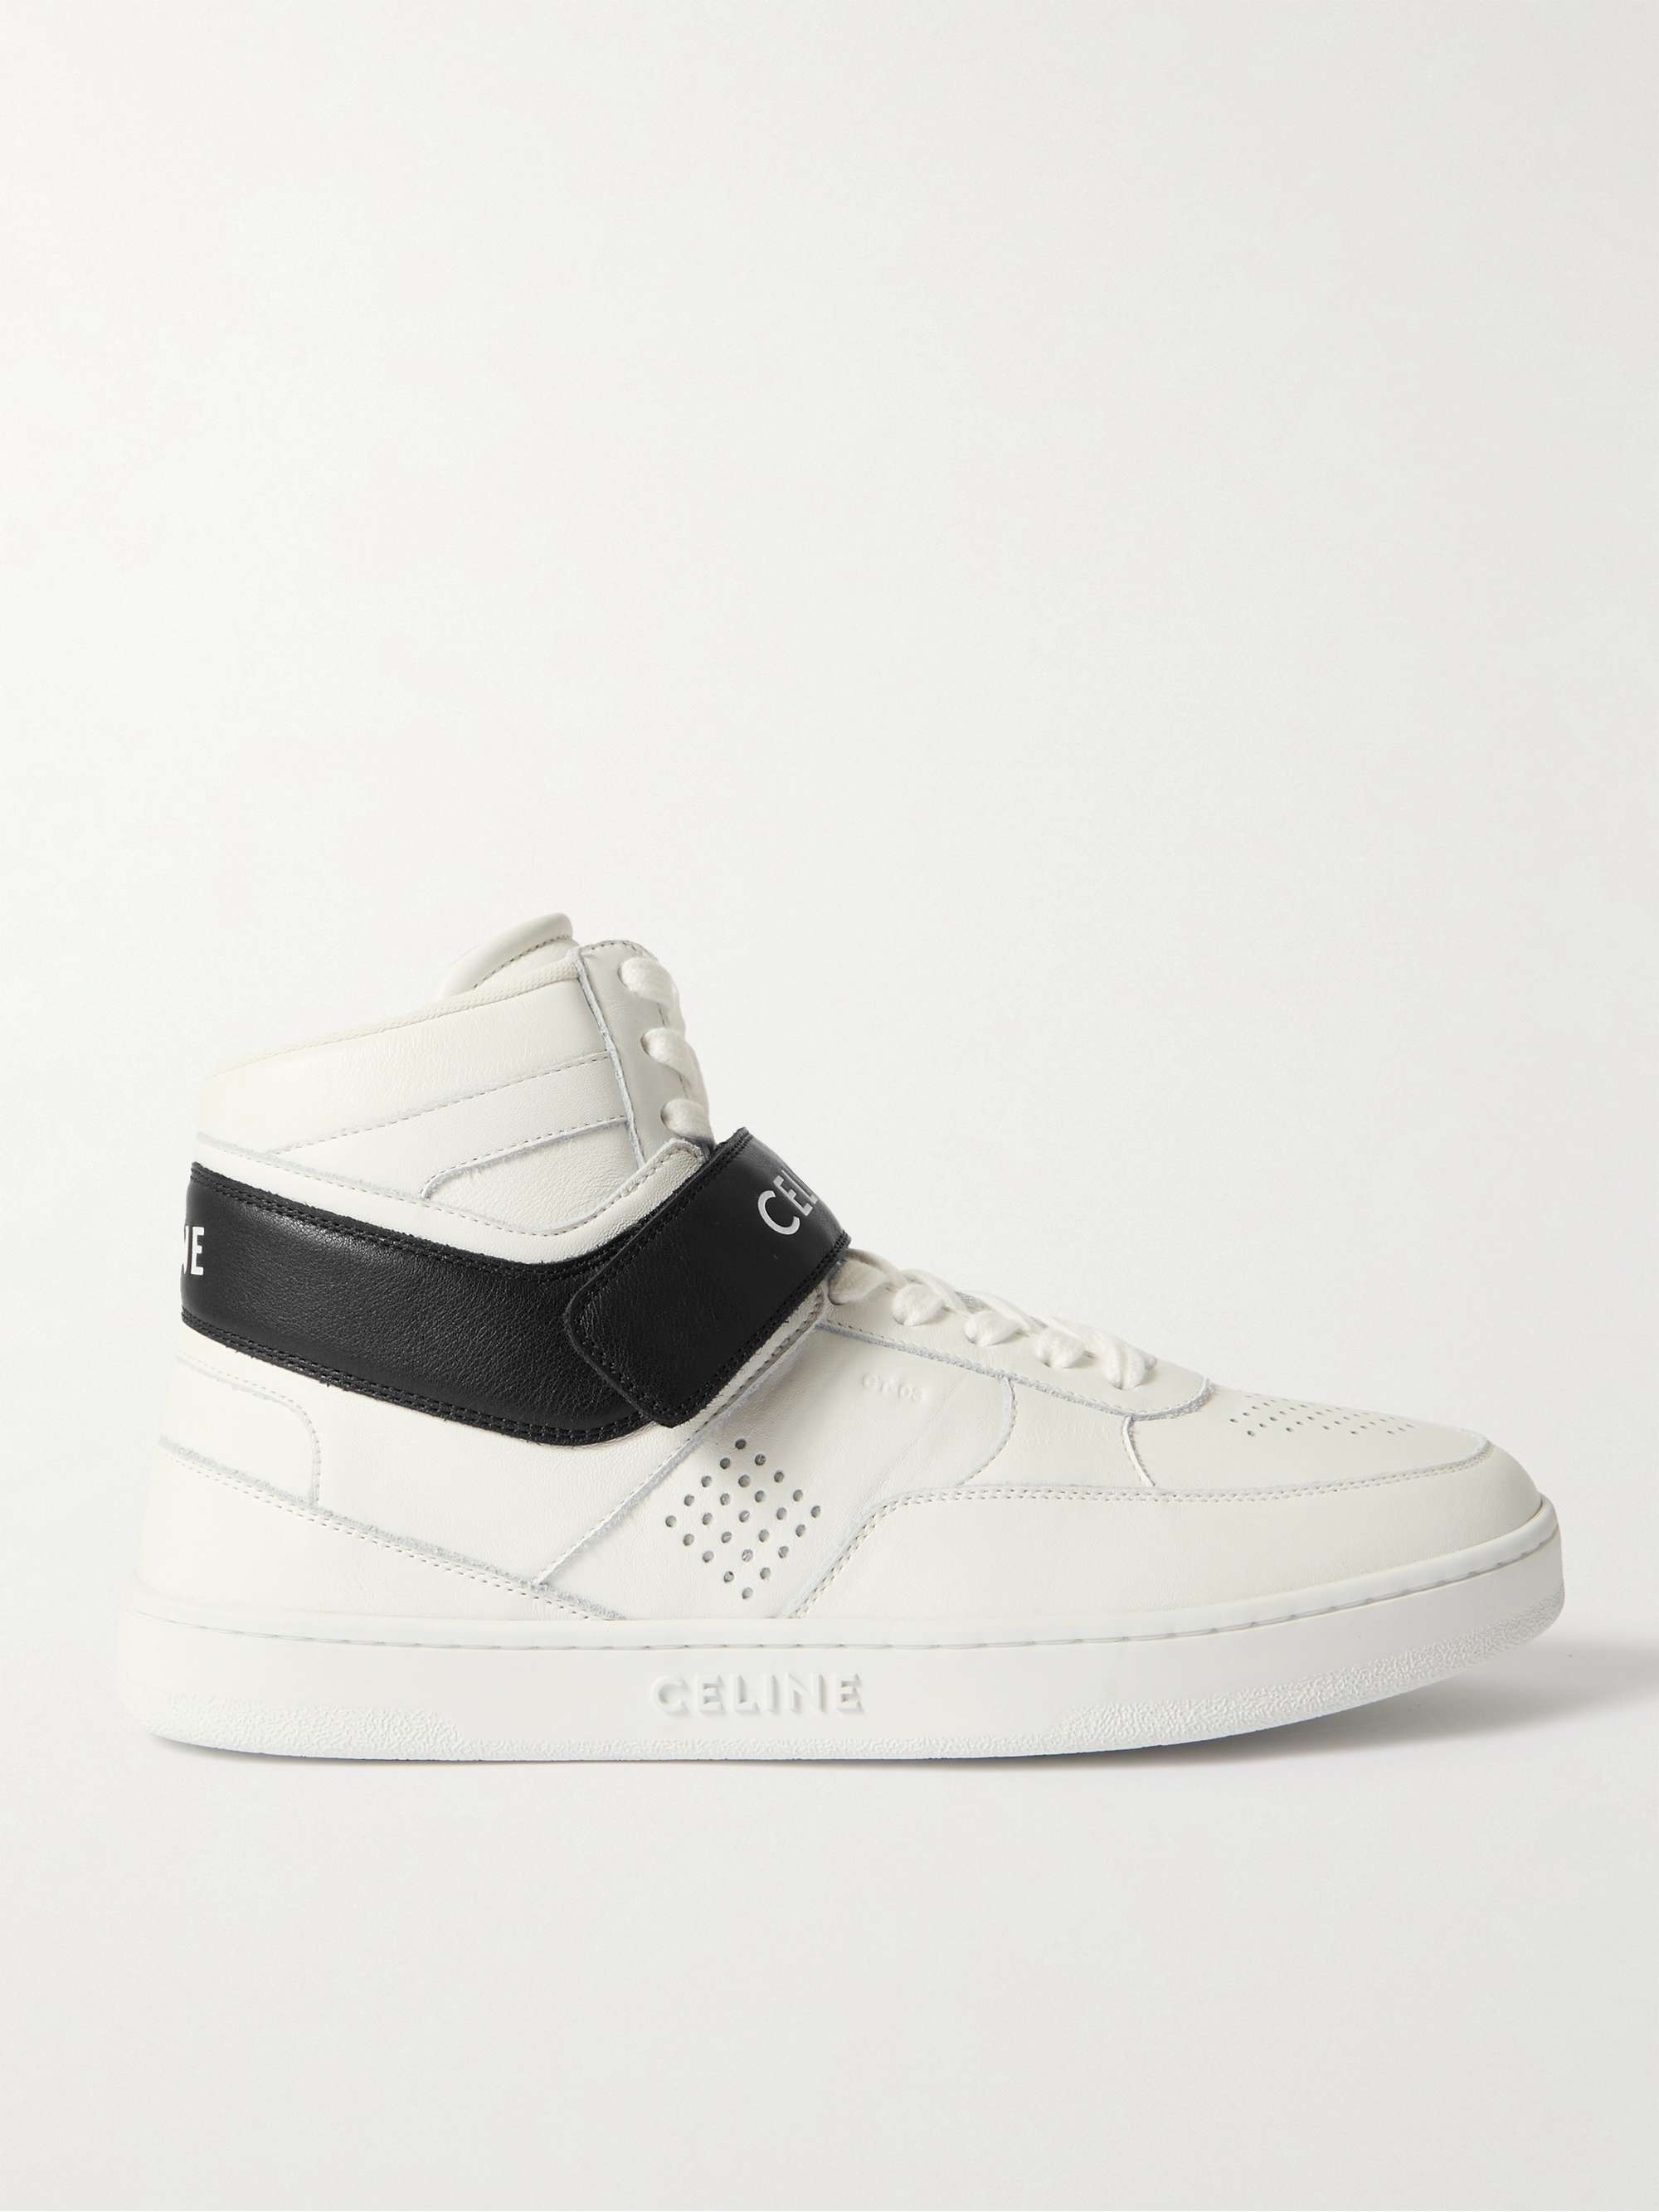 CELINE HOMME CT-03 Leather High-Top Sneakers for Men | MR PORTER